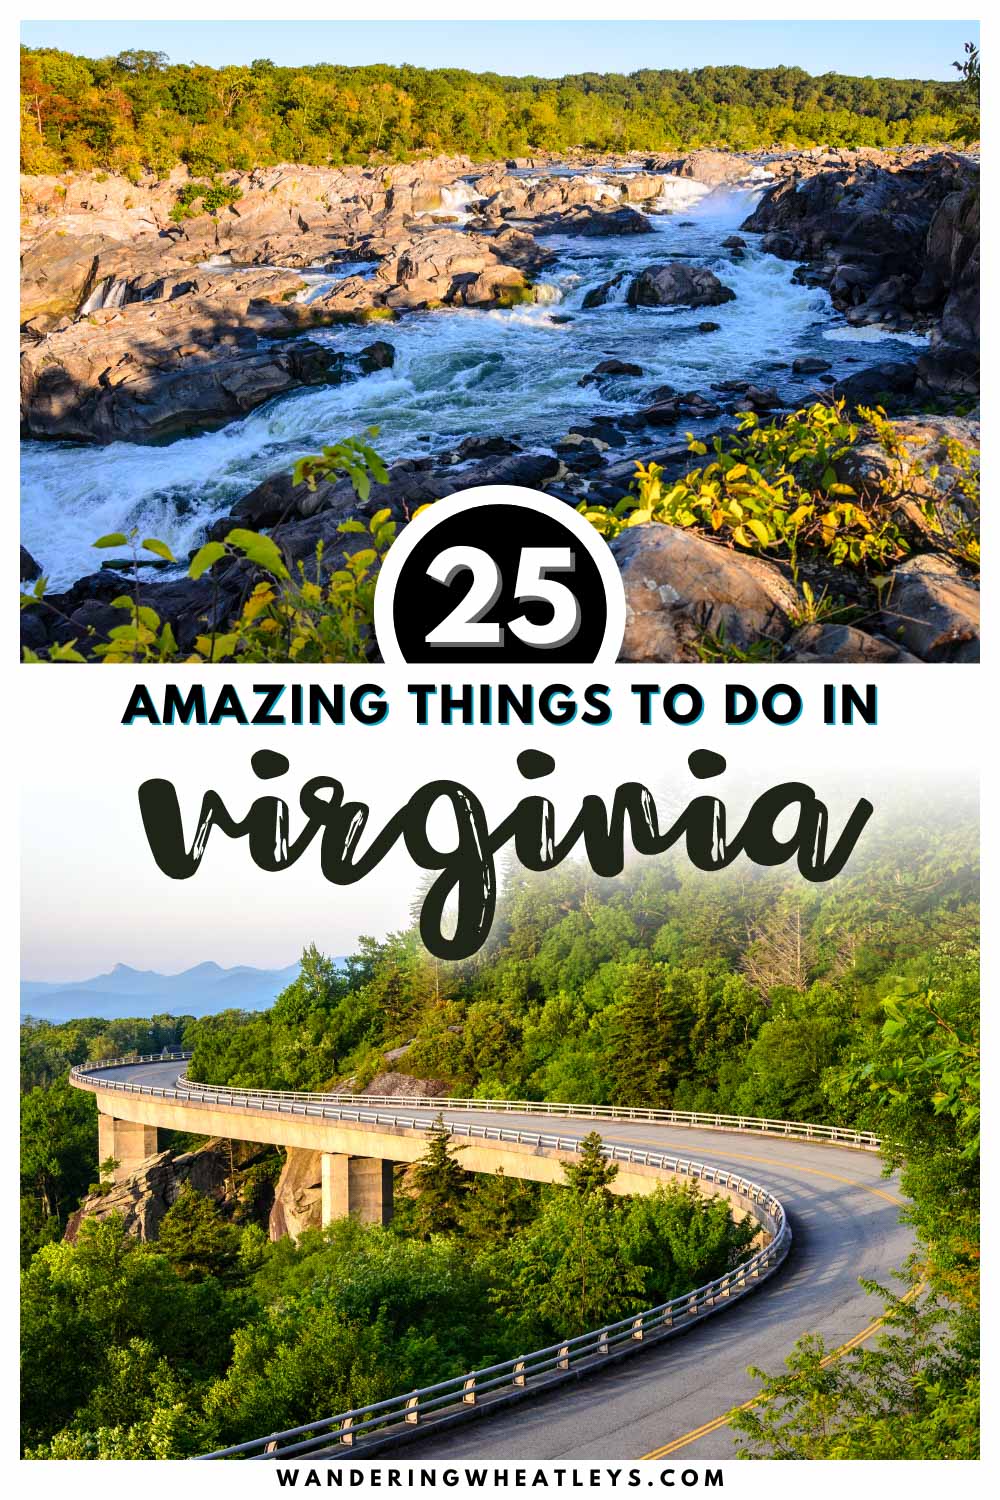 The Best Things to do in Virginia